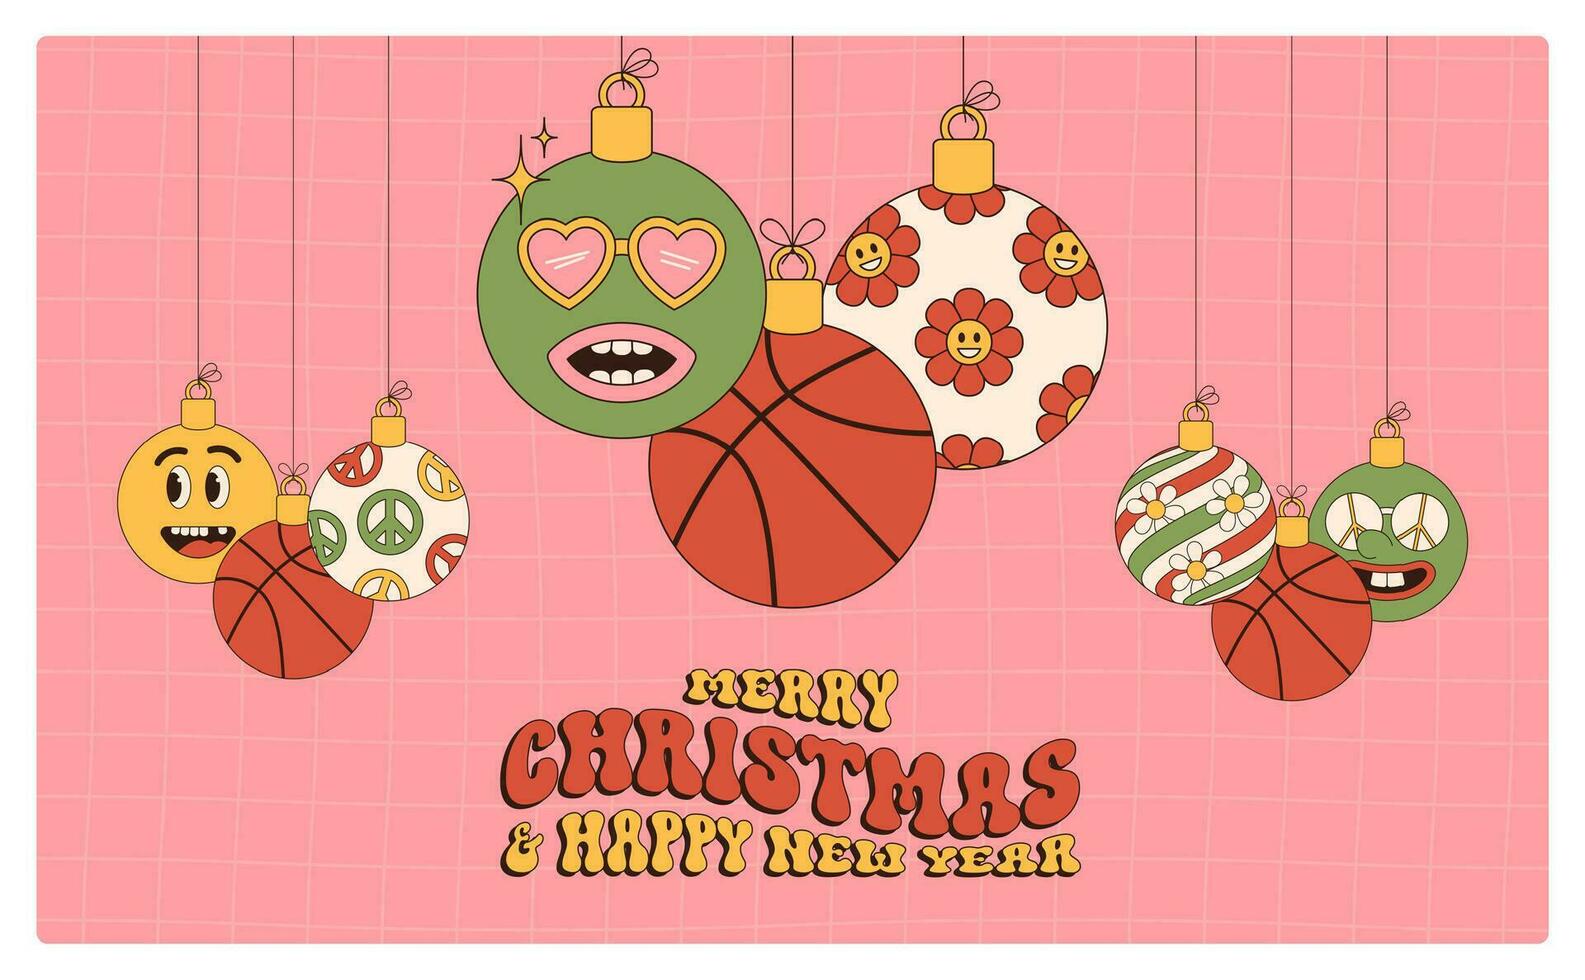 basketball Merry Christmas and Happy New Year groovy Sports greeting card. Hanging ball as a groovy Christmas ball on vibrant background. Vector illustration.